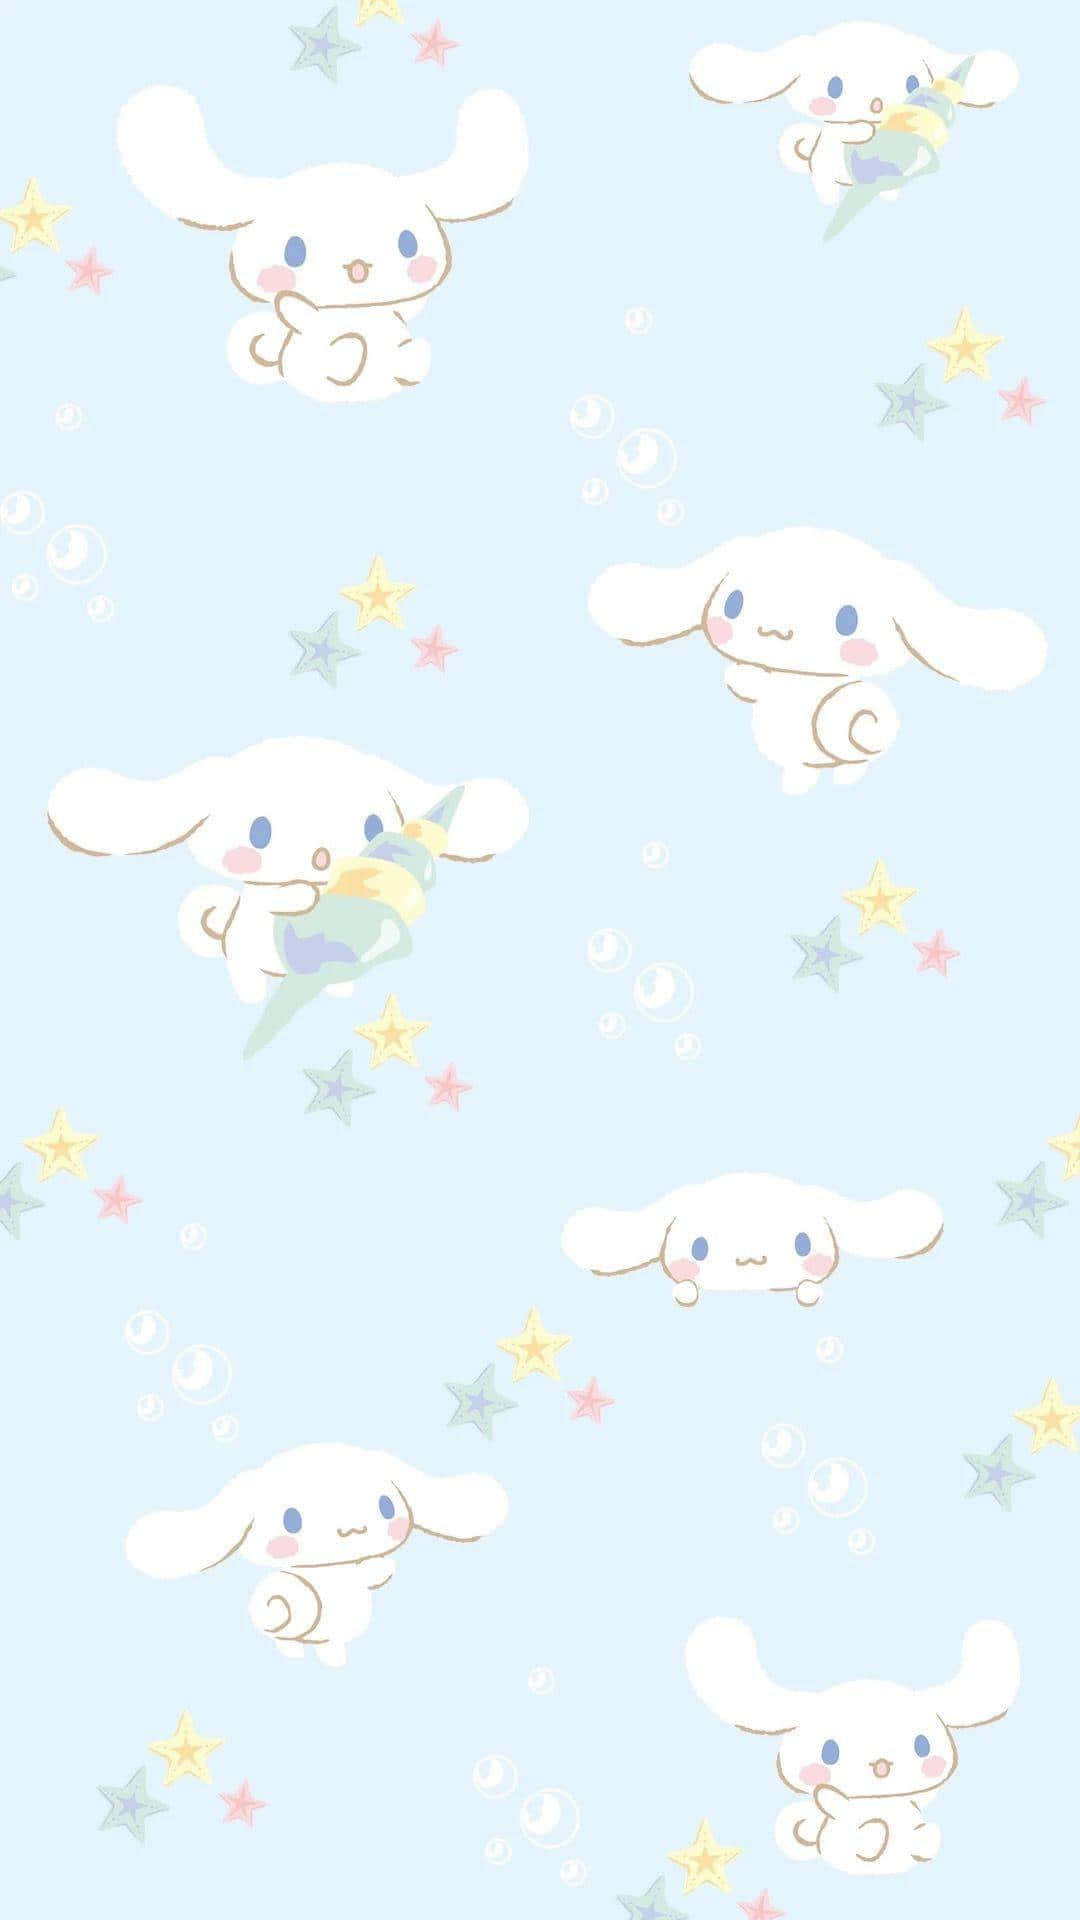 Joining the Study Group with Cinnamoroll Wallpaper